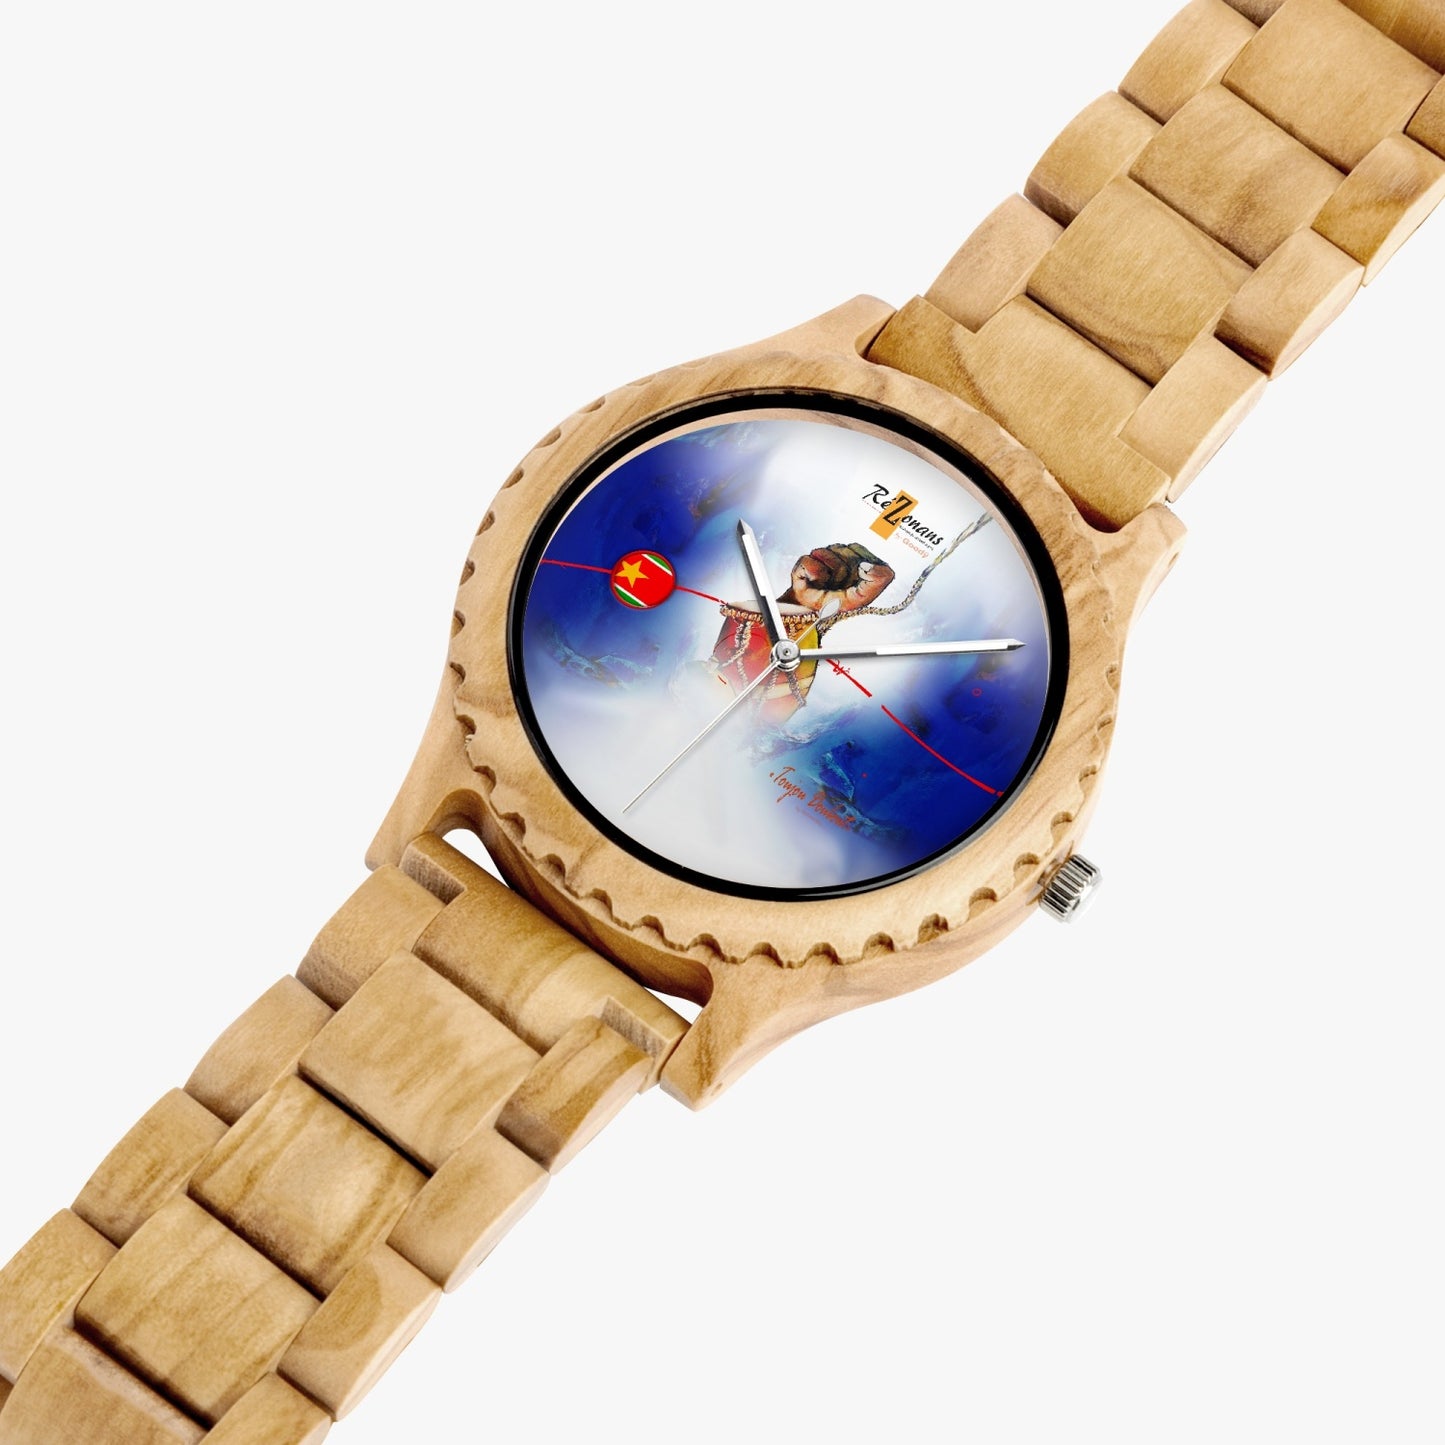 Natural wood watch "Toujoublé"